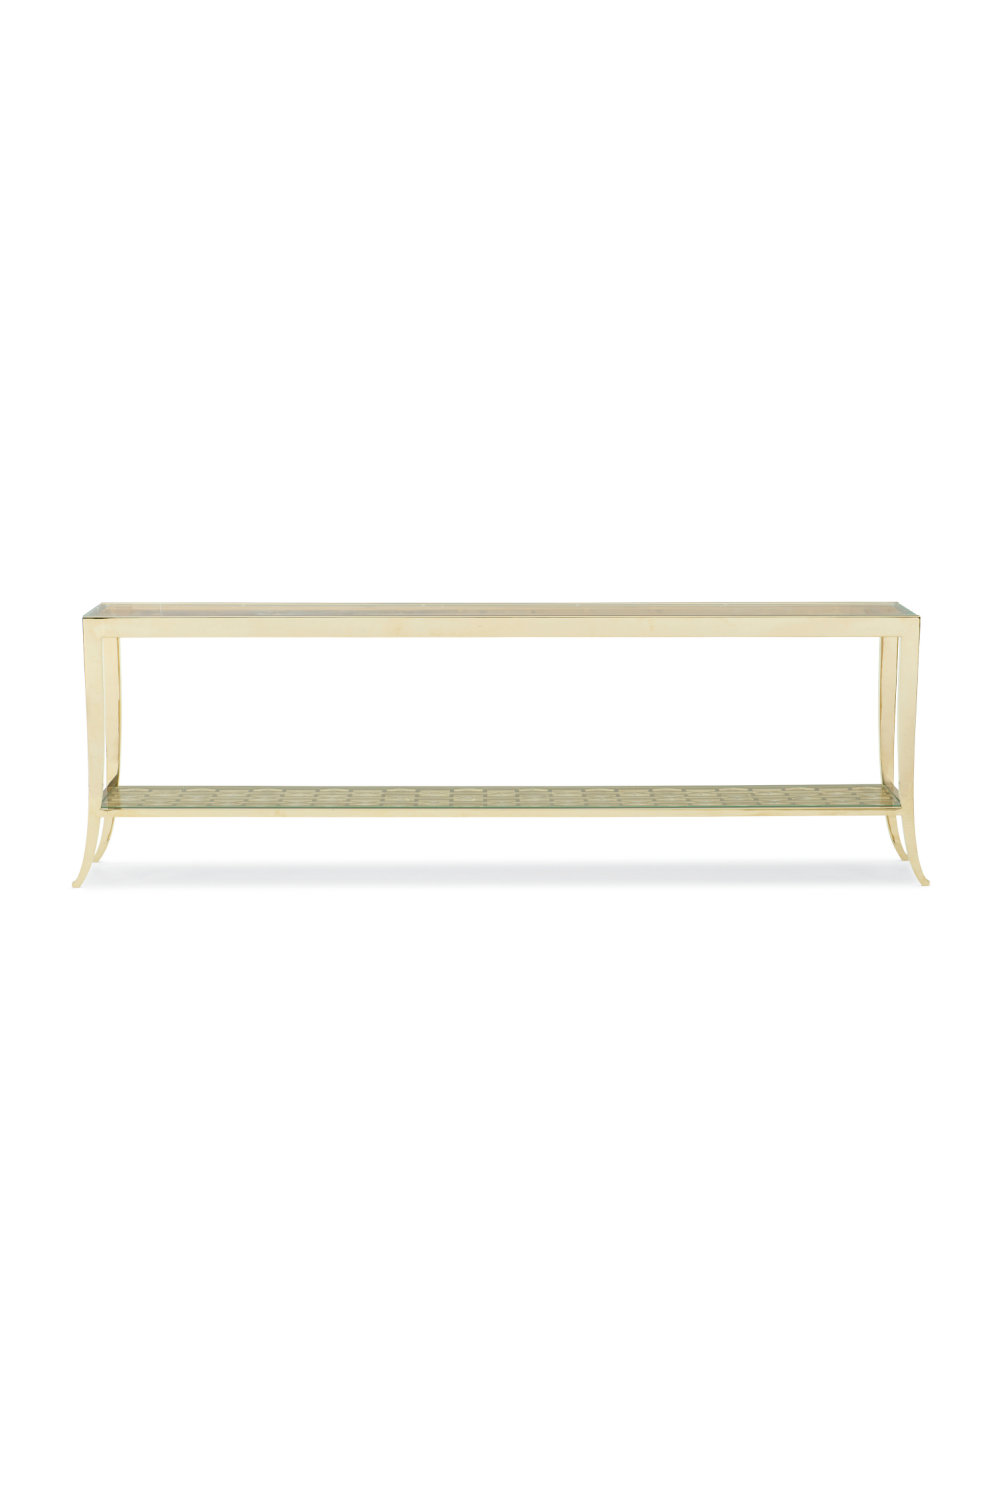 Gold Honeycomb Console Table | Caracole In A Holding Pattern | Oroa.com